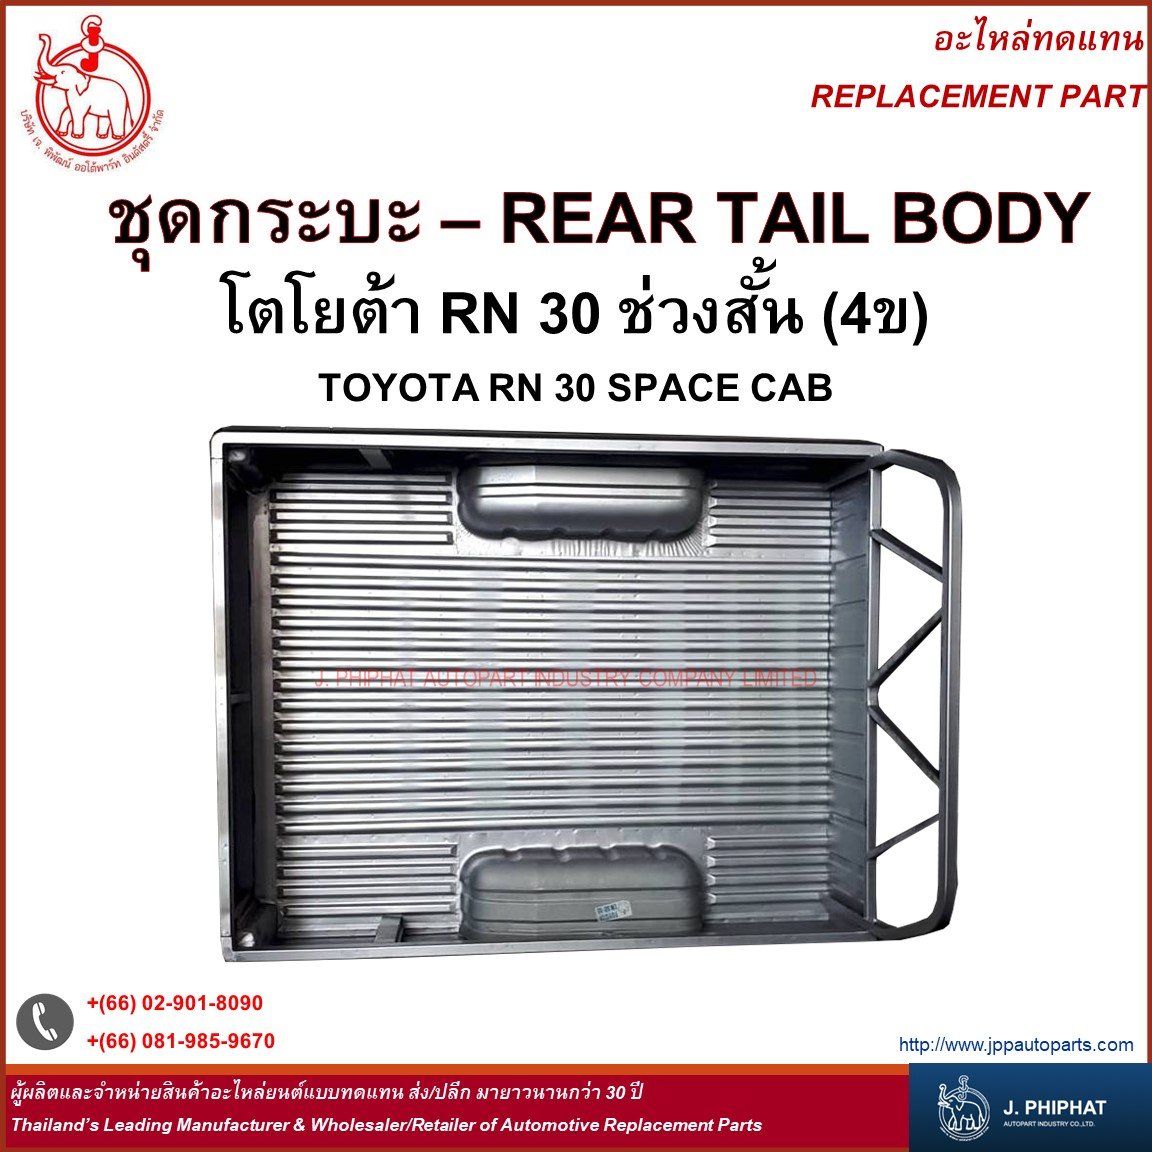 Rear Tail Body - Toyota RN30 Space CAB